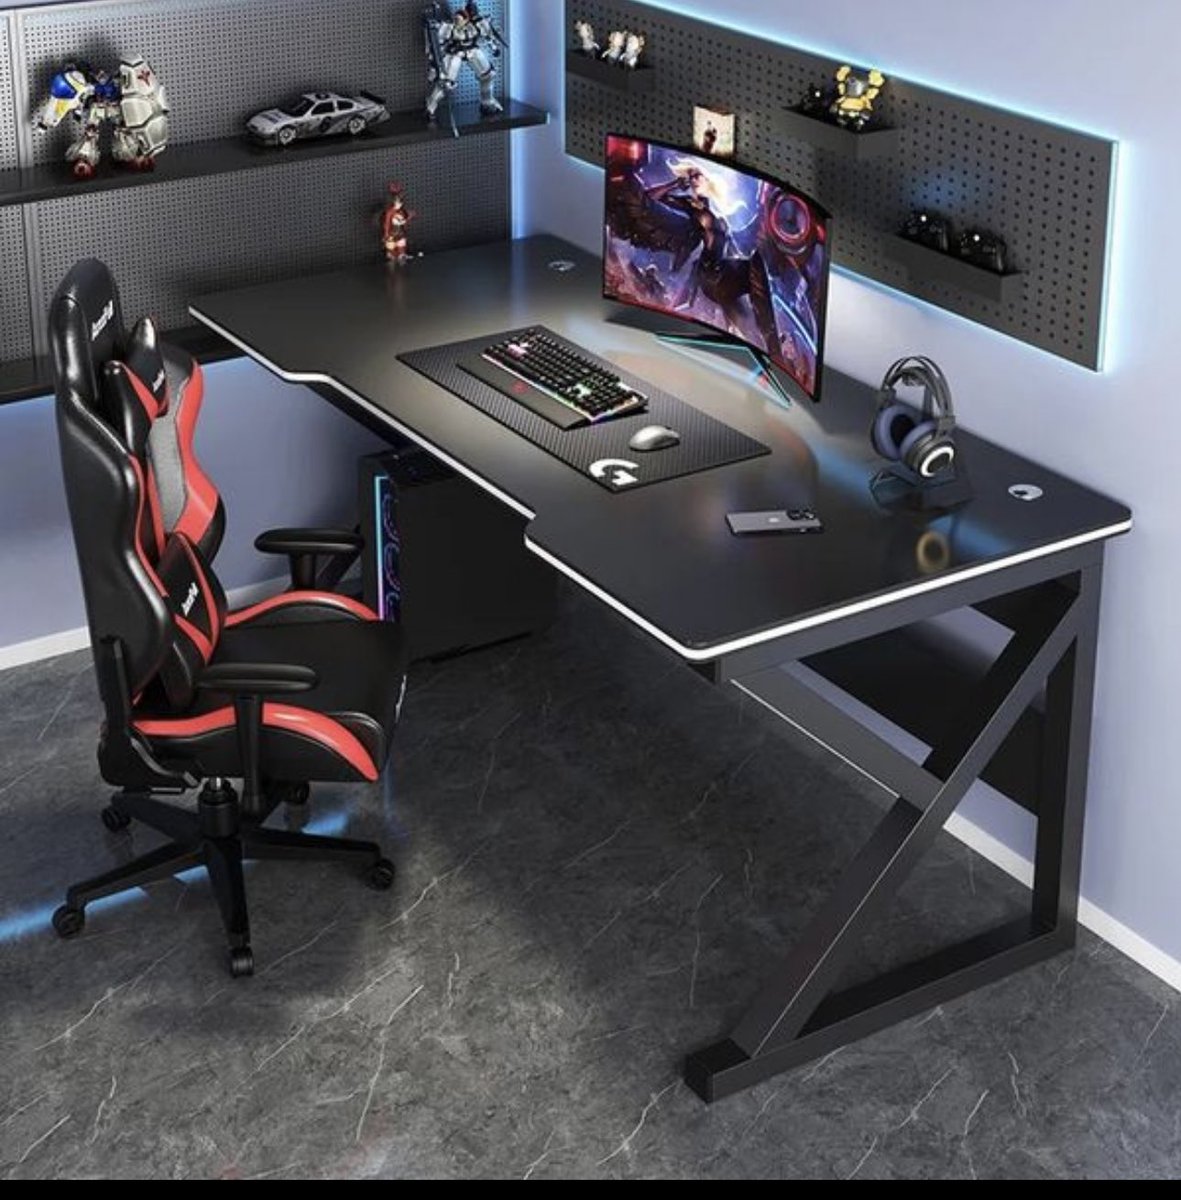 How much do you think this workstation cost?